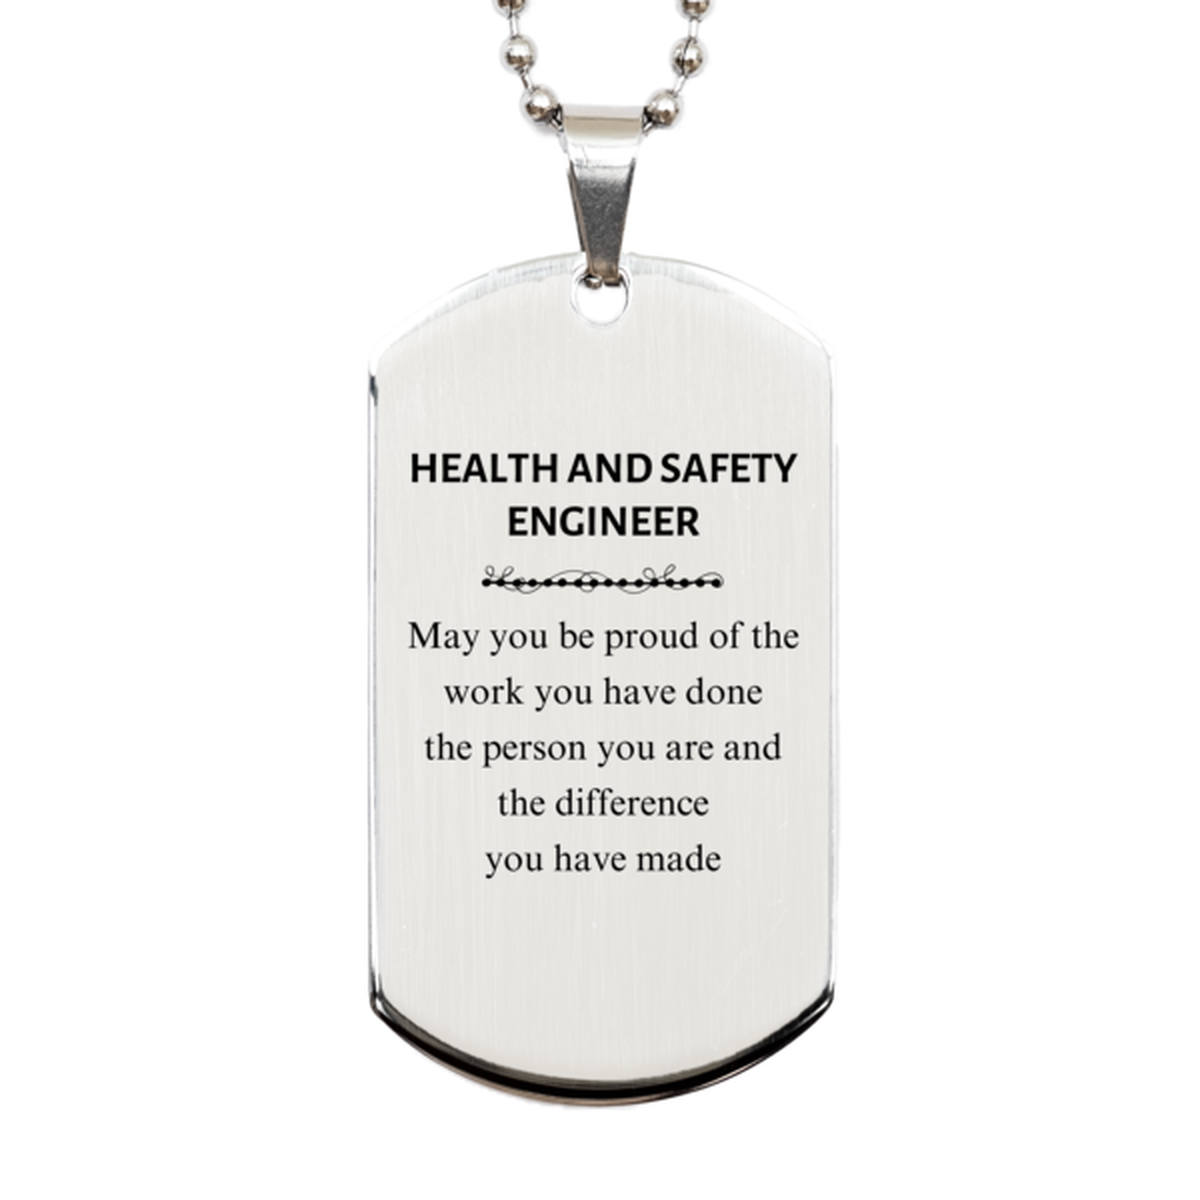 Health and Safety Engineer May you be proud of the work you have done, Retirement Health and Safety Engineer Silver Dog Tag for Colleague Appreciation Gifts Amazing for Health and Safety Engineer